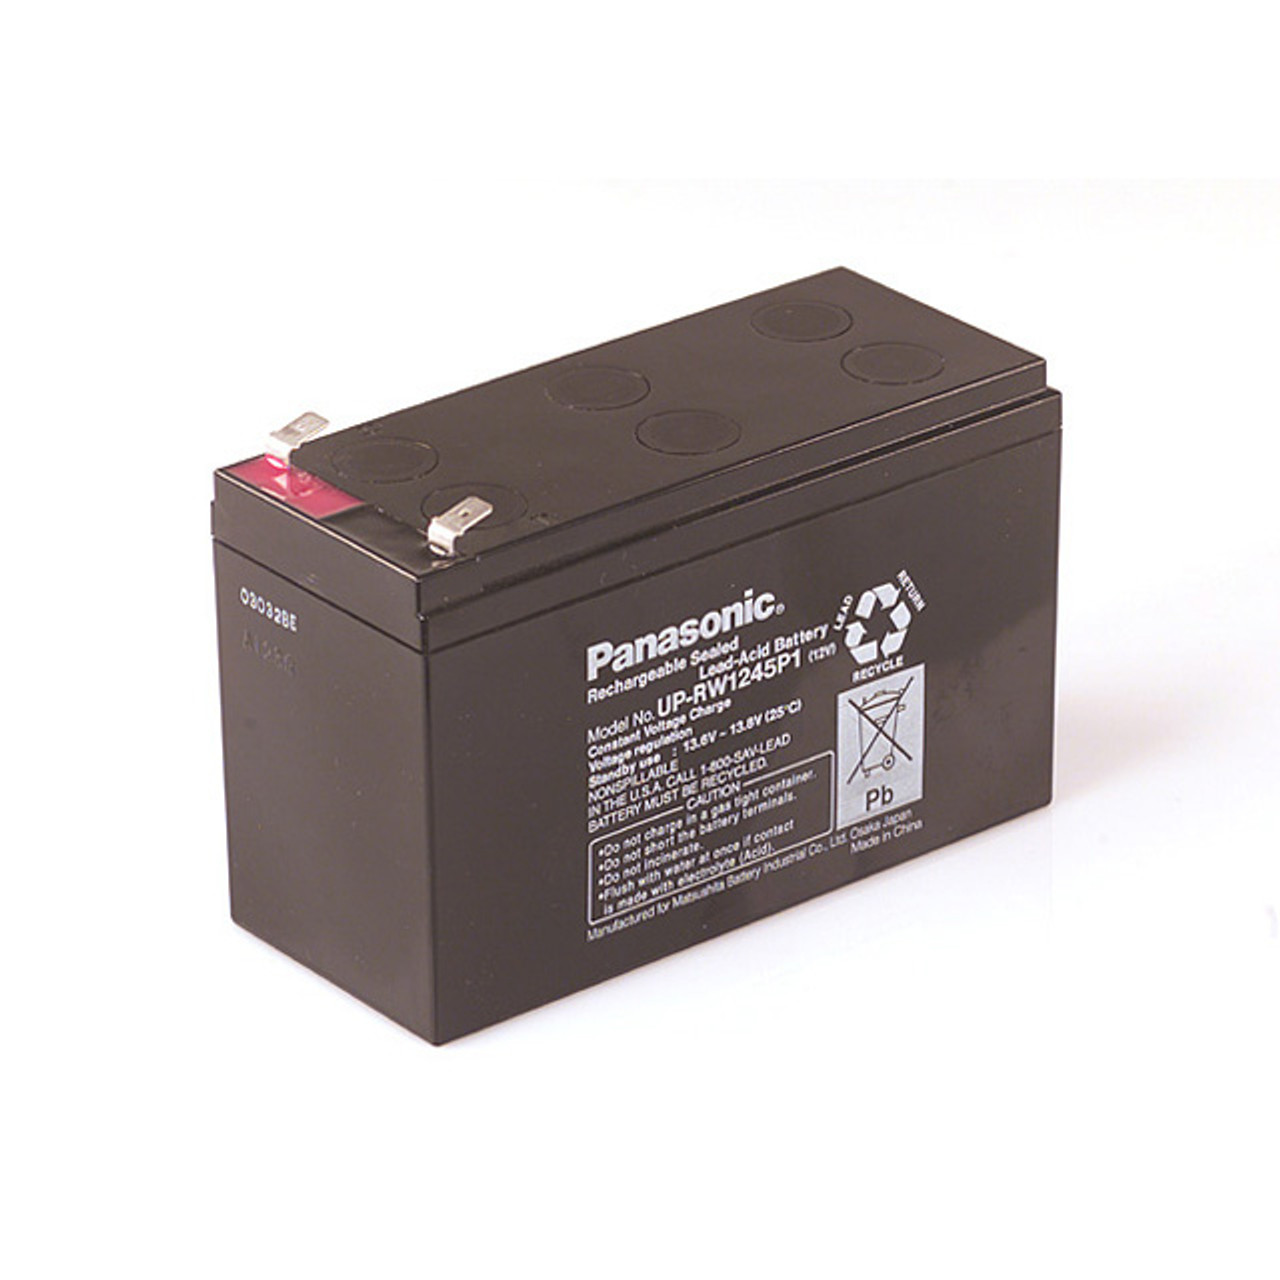 Panasonic UP-RW1245P1 Battery - 12V 9.0Ah Sealed Rechargeable, Replacement Batteries for LC-R129, LC-R129P, LC-R129P1, RBC-17, UP-RW1245P, UP-VW1245P1